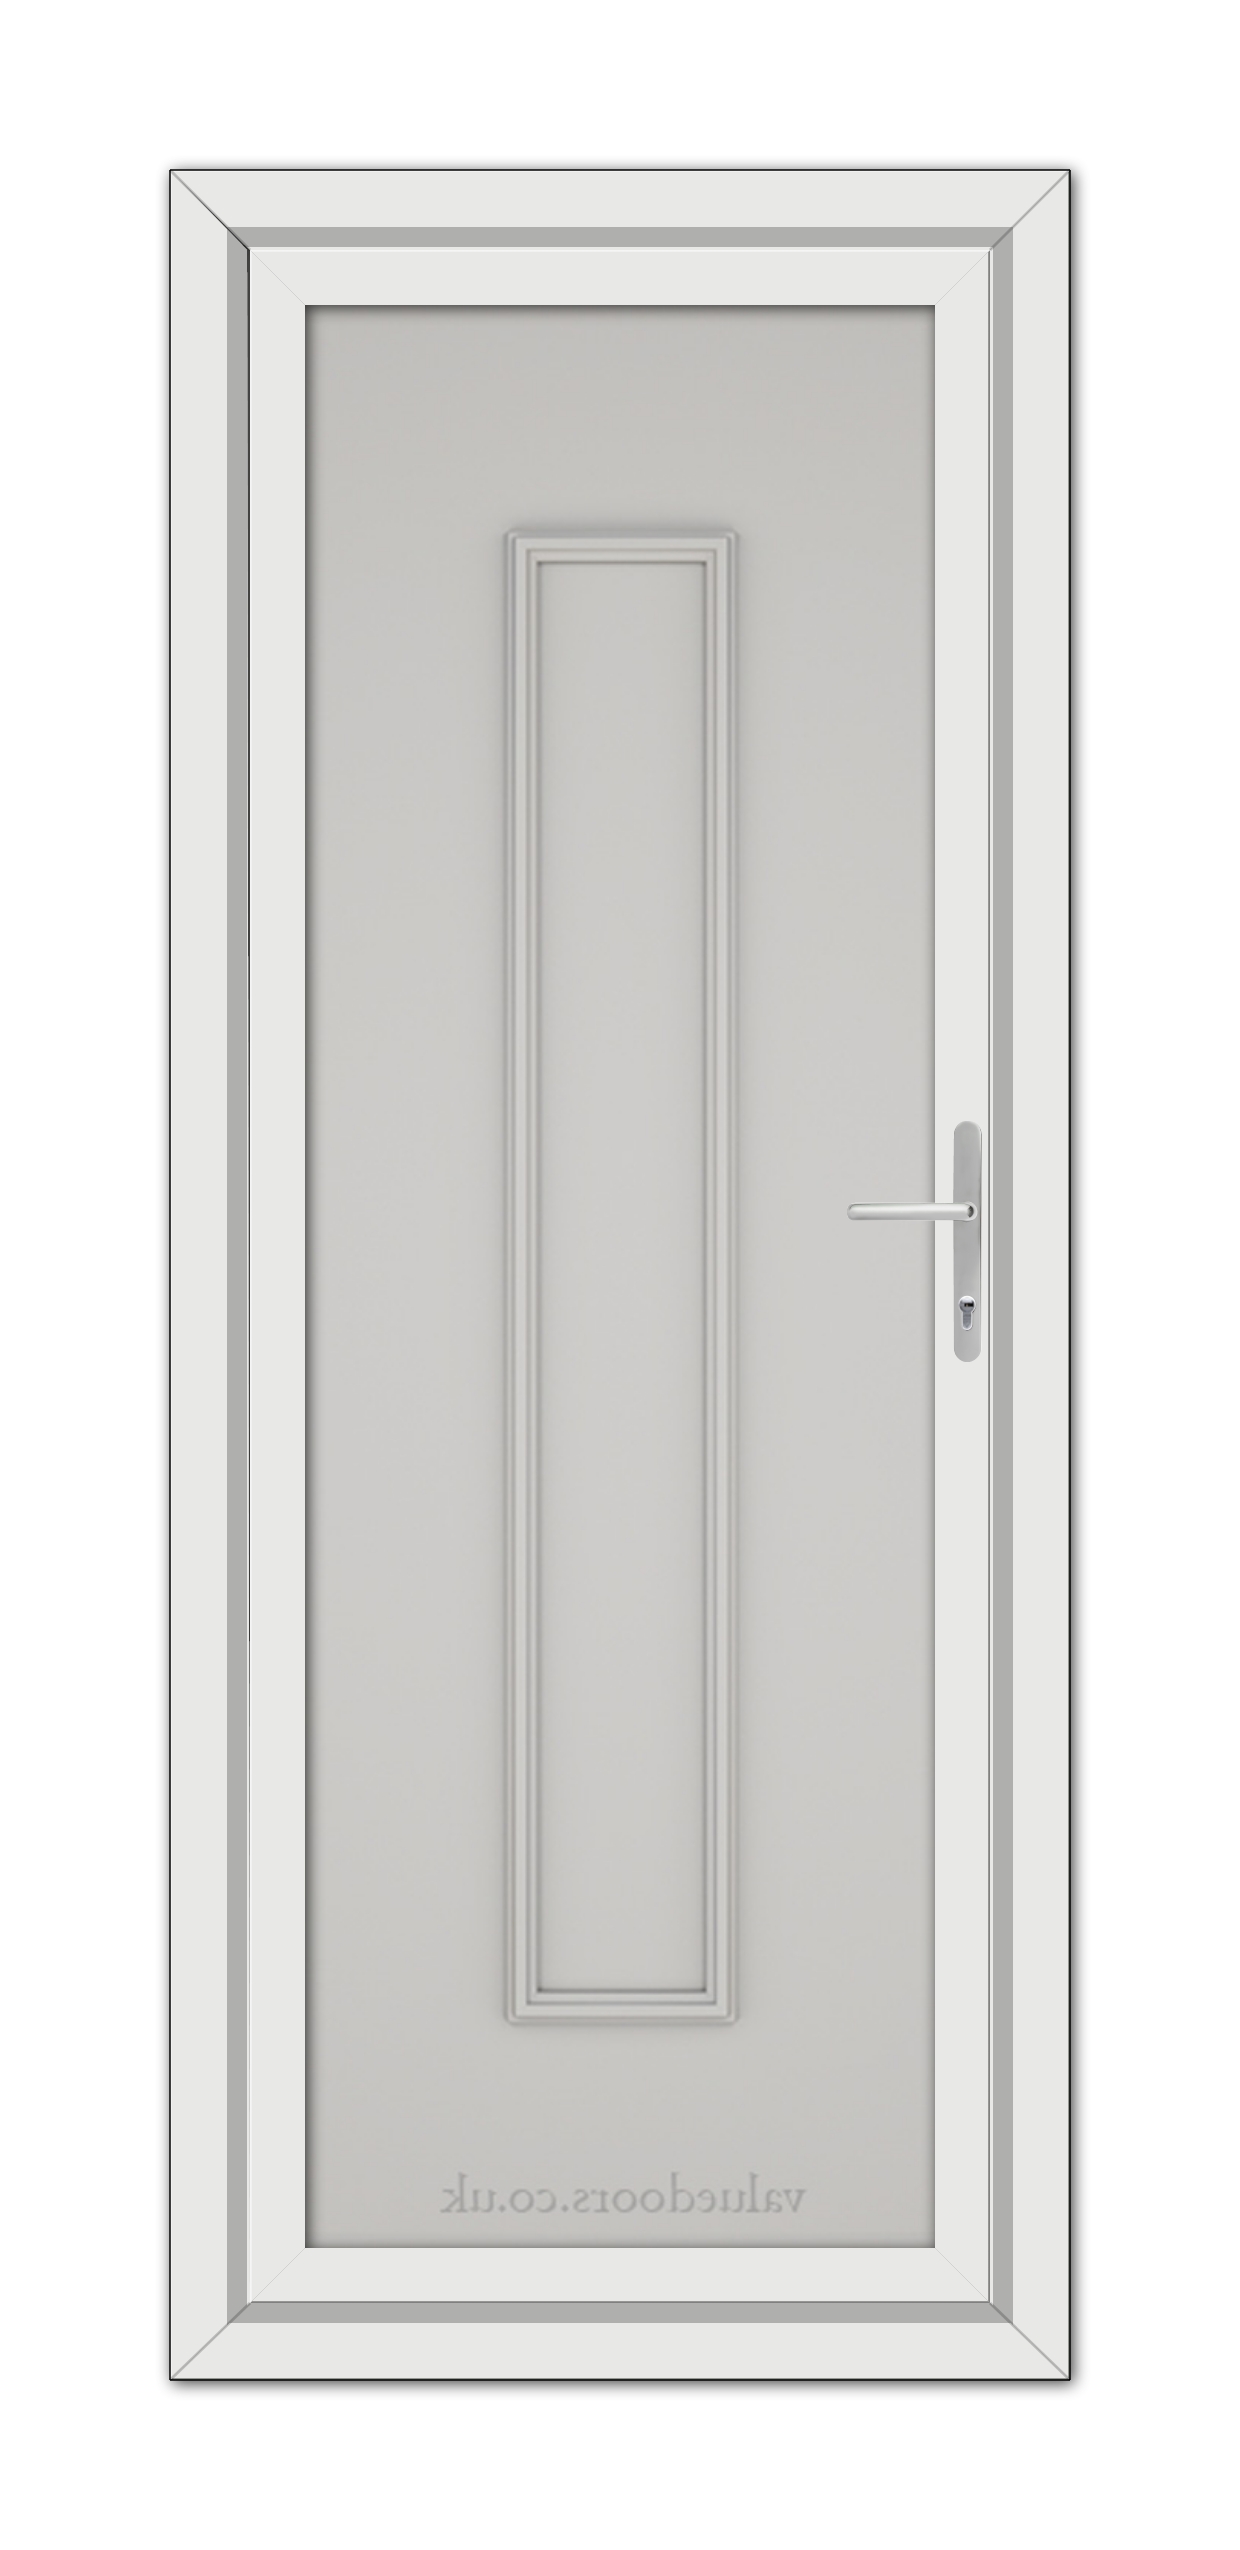 A vertical image of a closed Silver Grey Rome Solid uPVC Door with a simple, modern design, featuring a rectangular panel and a metallic handle on the right side.